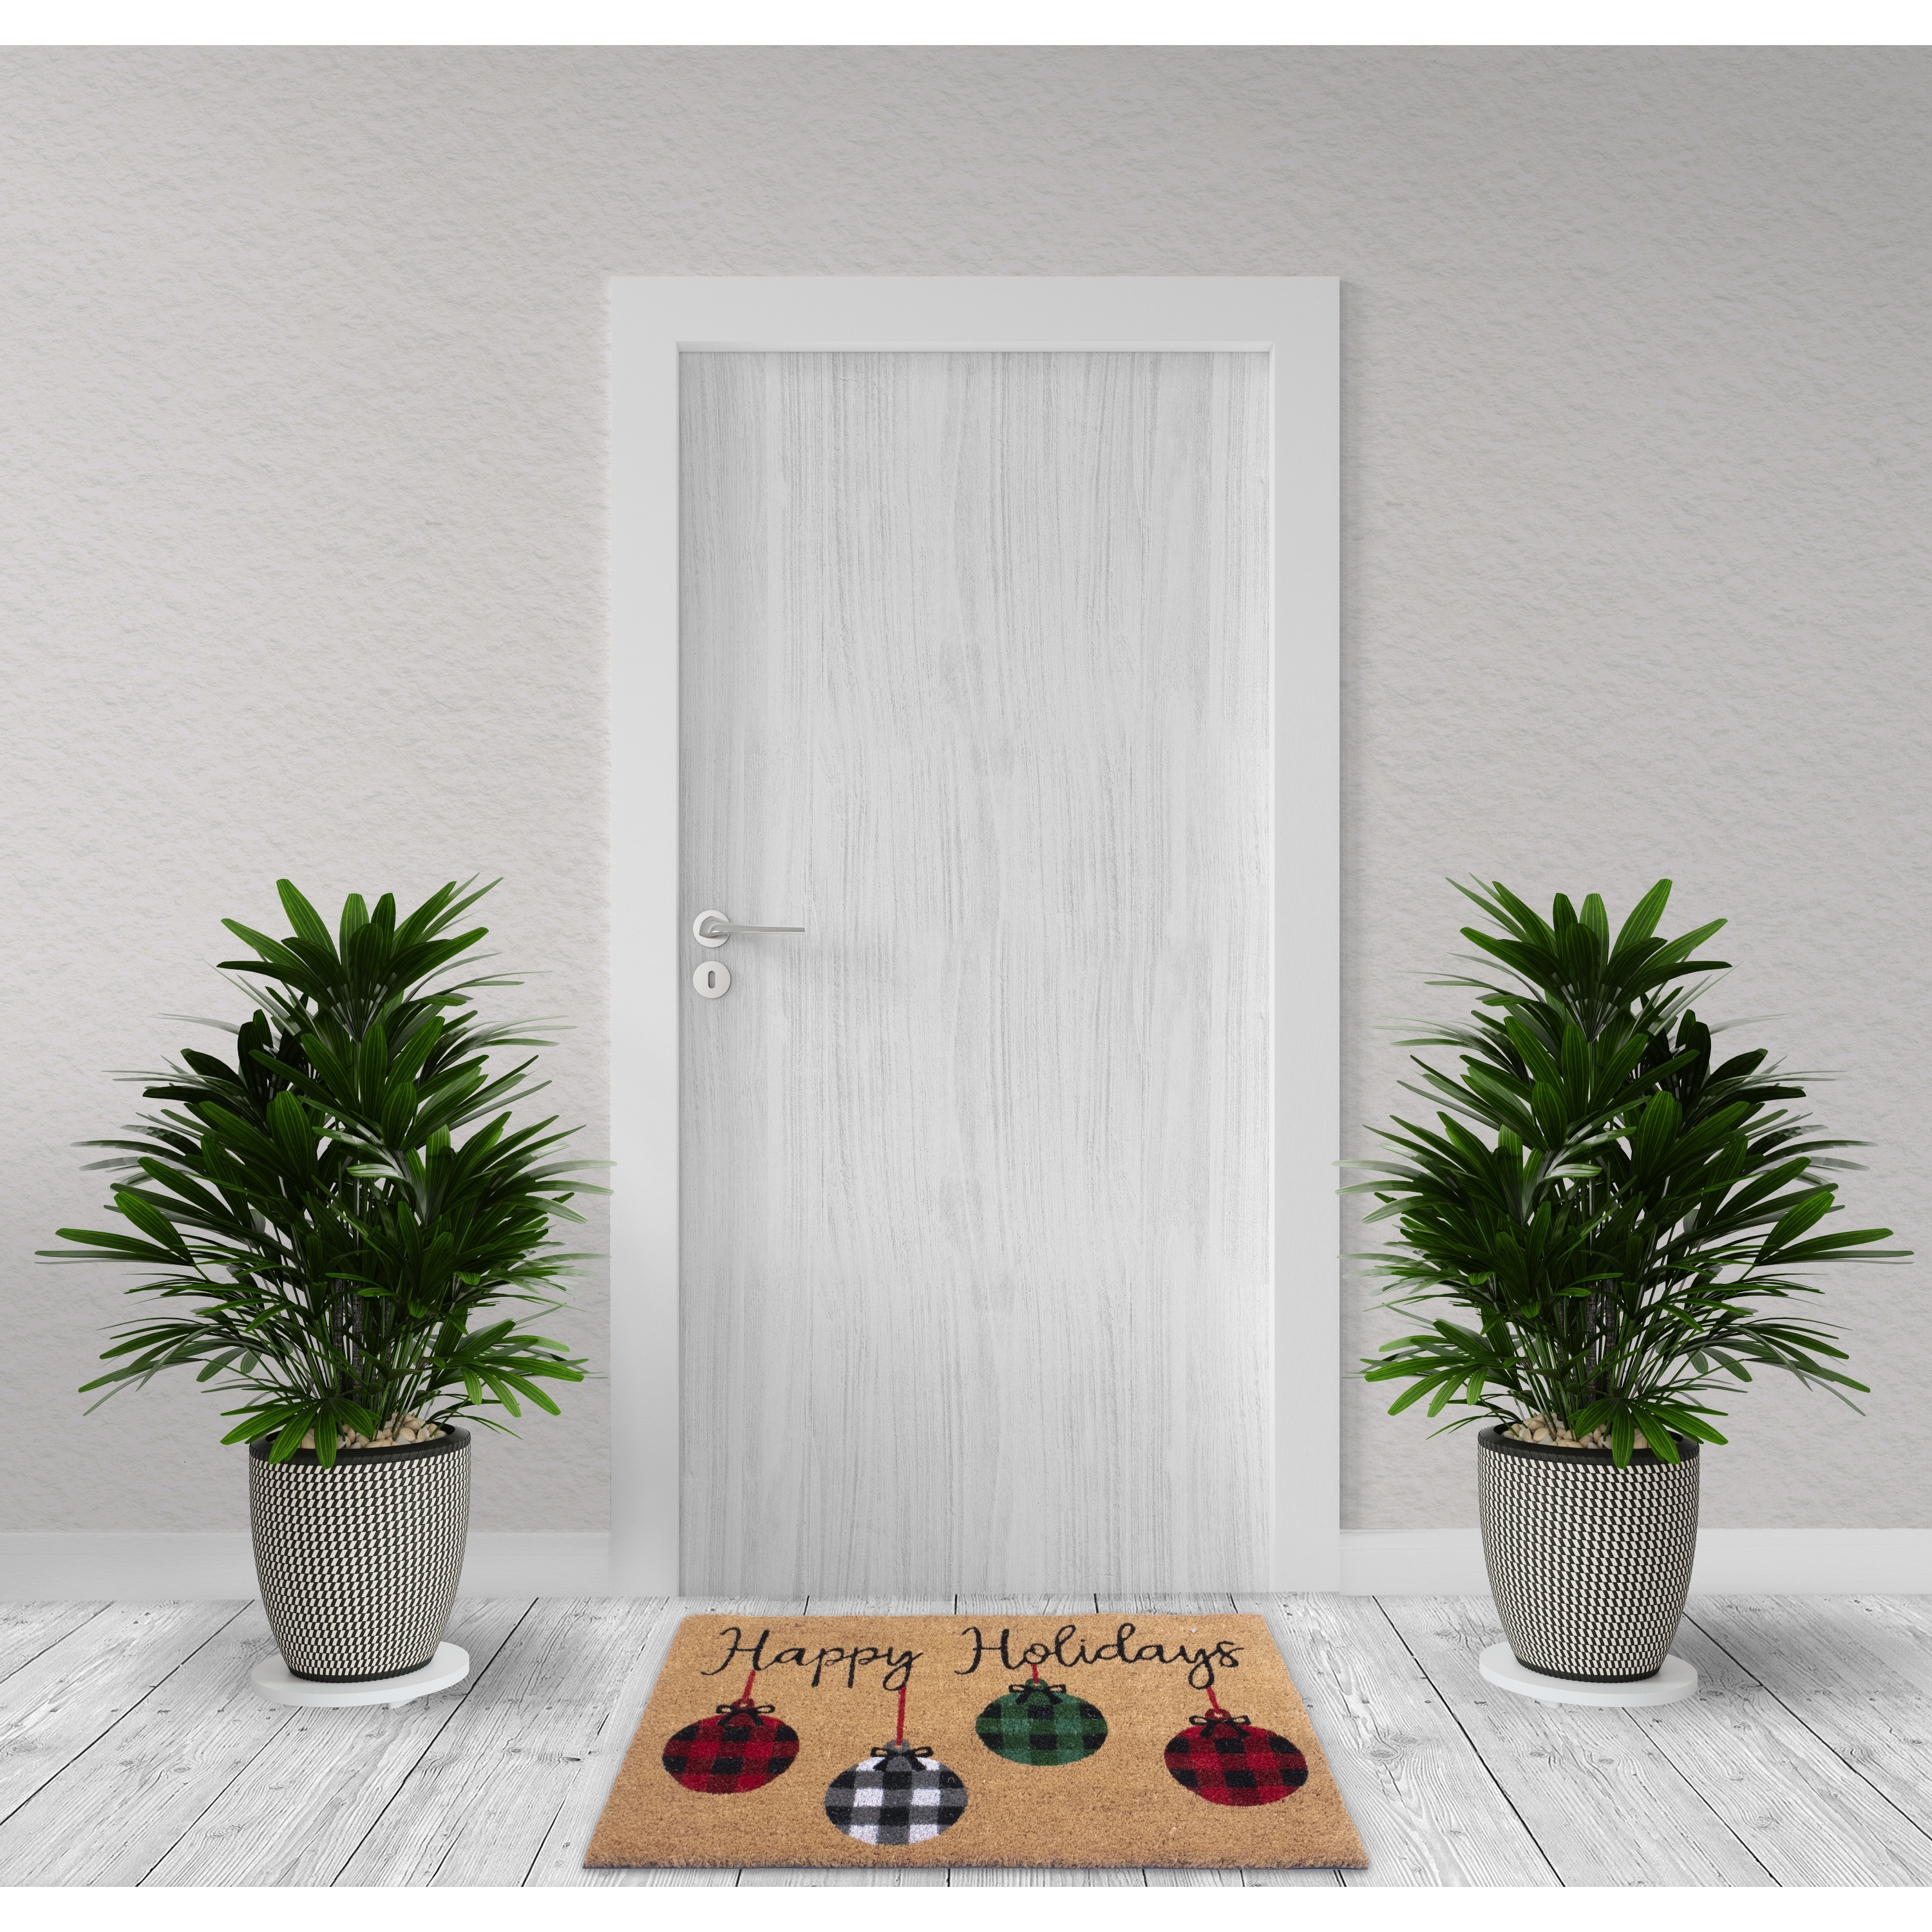 https://ak1.ostkcdn.com/images/products/is/images/direct/12e0631dc7ffaf6b6dd0eb7b6ce9caa657034ada/Mascot-Hardware-%22Happy-Holiday%22-Script-Doormat%2C-Coir-Outdoor-Welcome-Mat%2C-Christmas-welcome-Doormat-for-Home-D%C3%A9cor.jpg